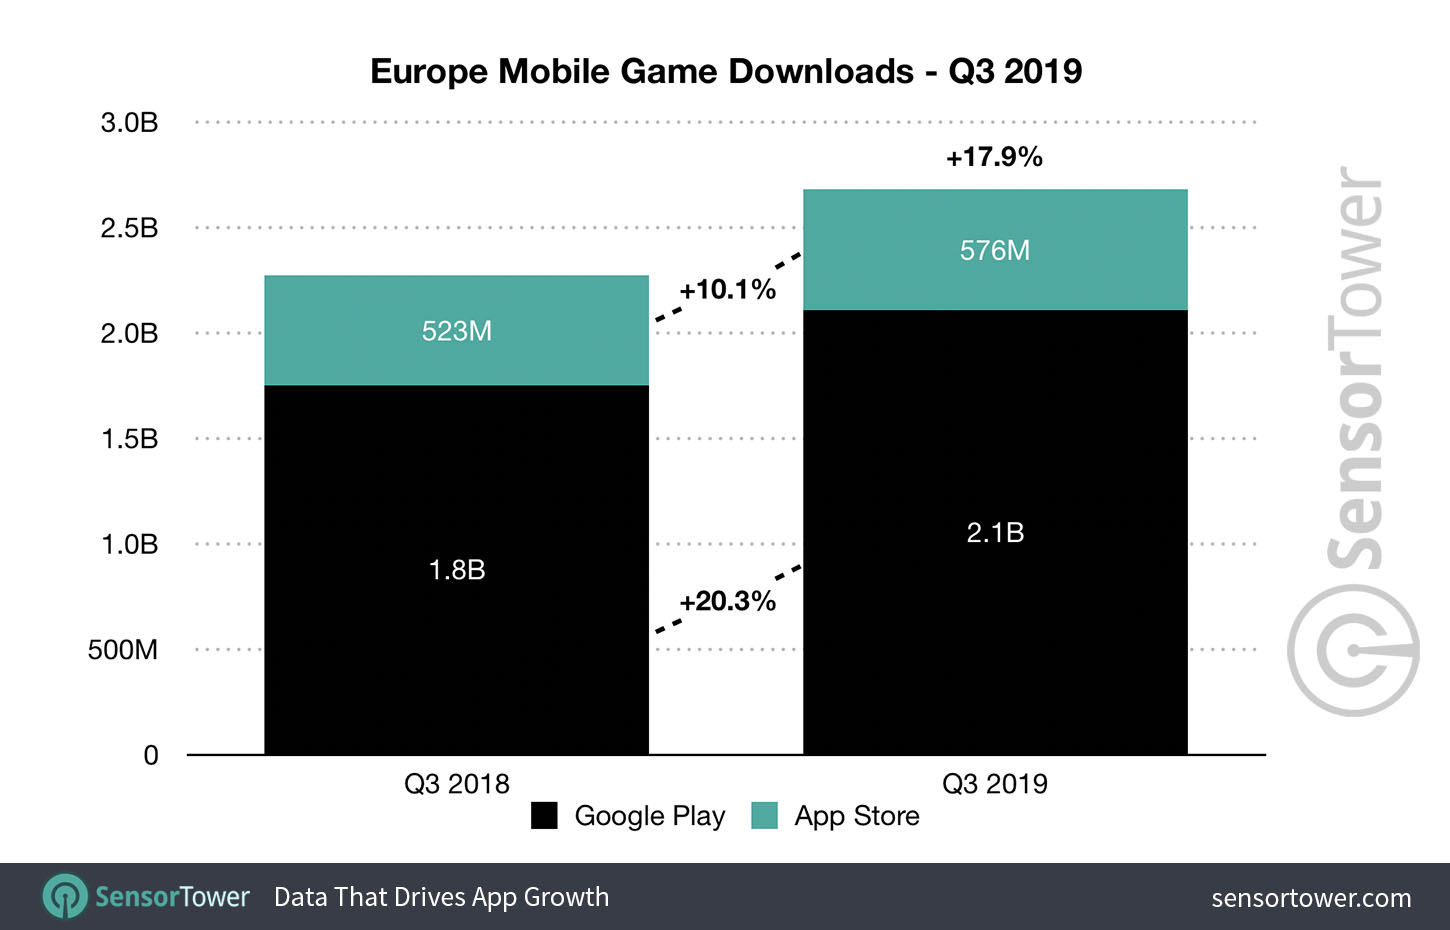 Q3 2019 Mobile Game Downloads for Europe